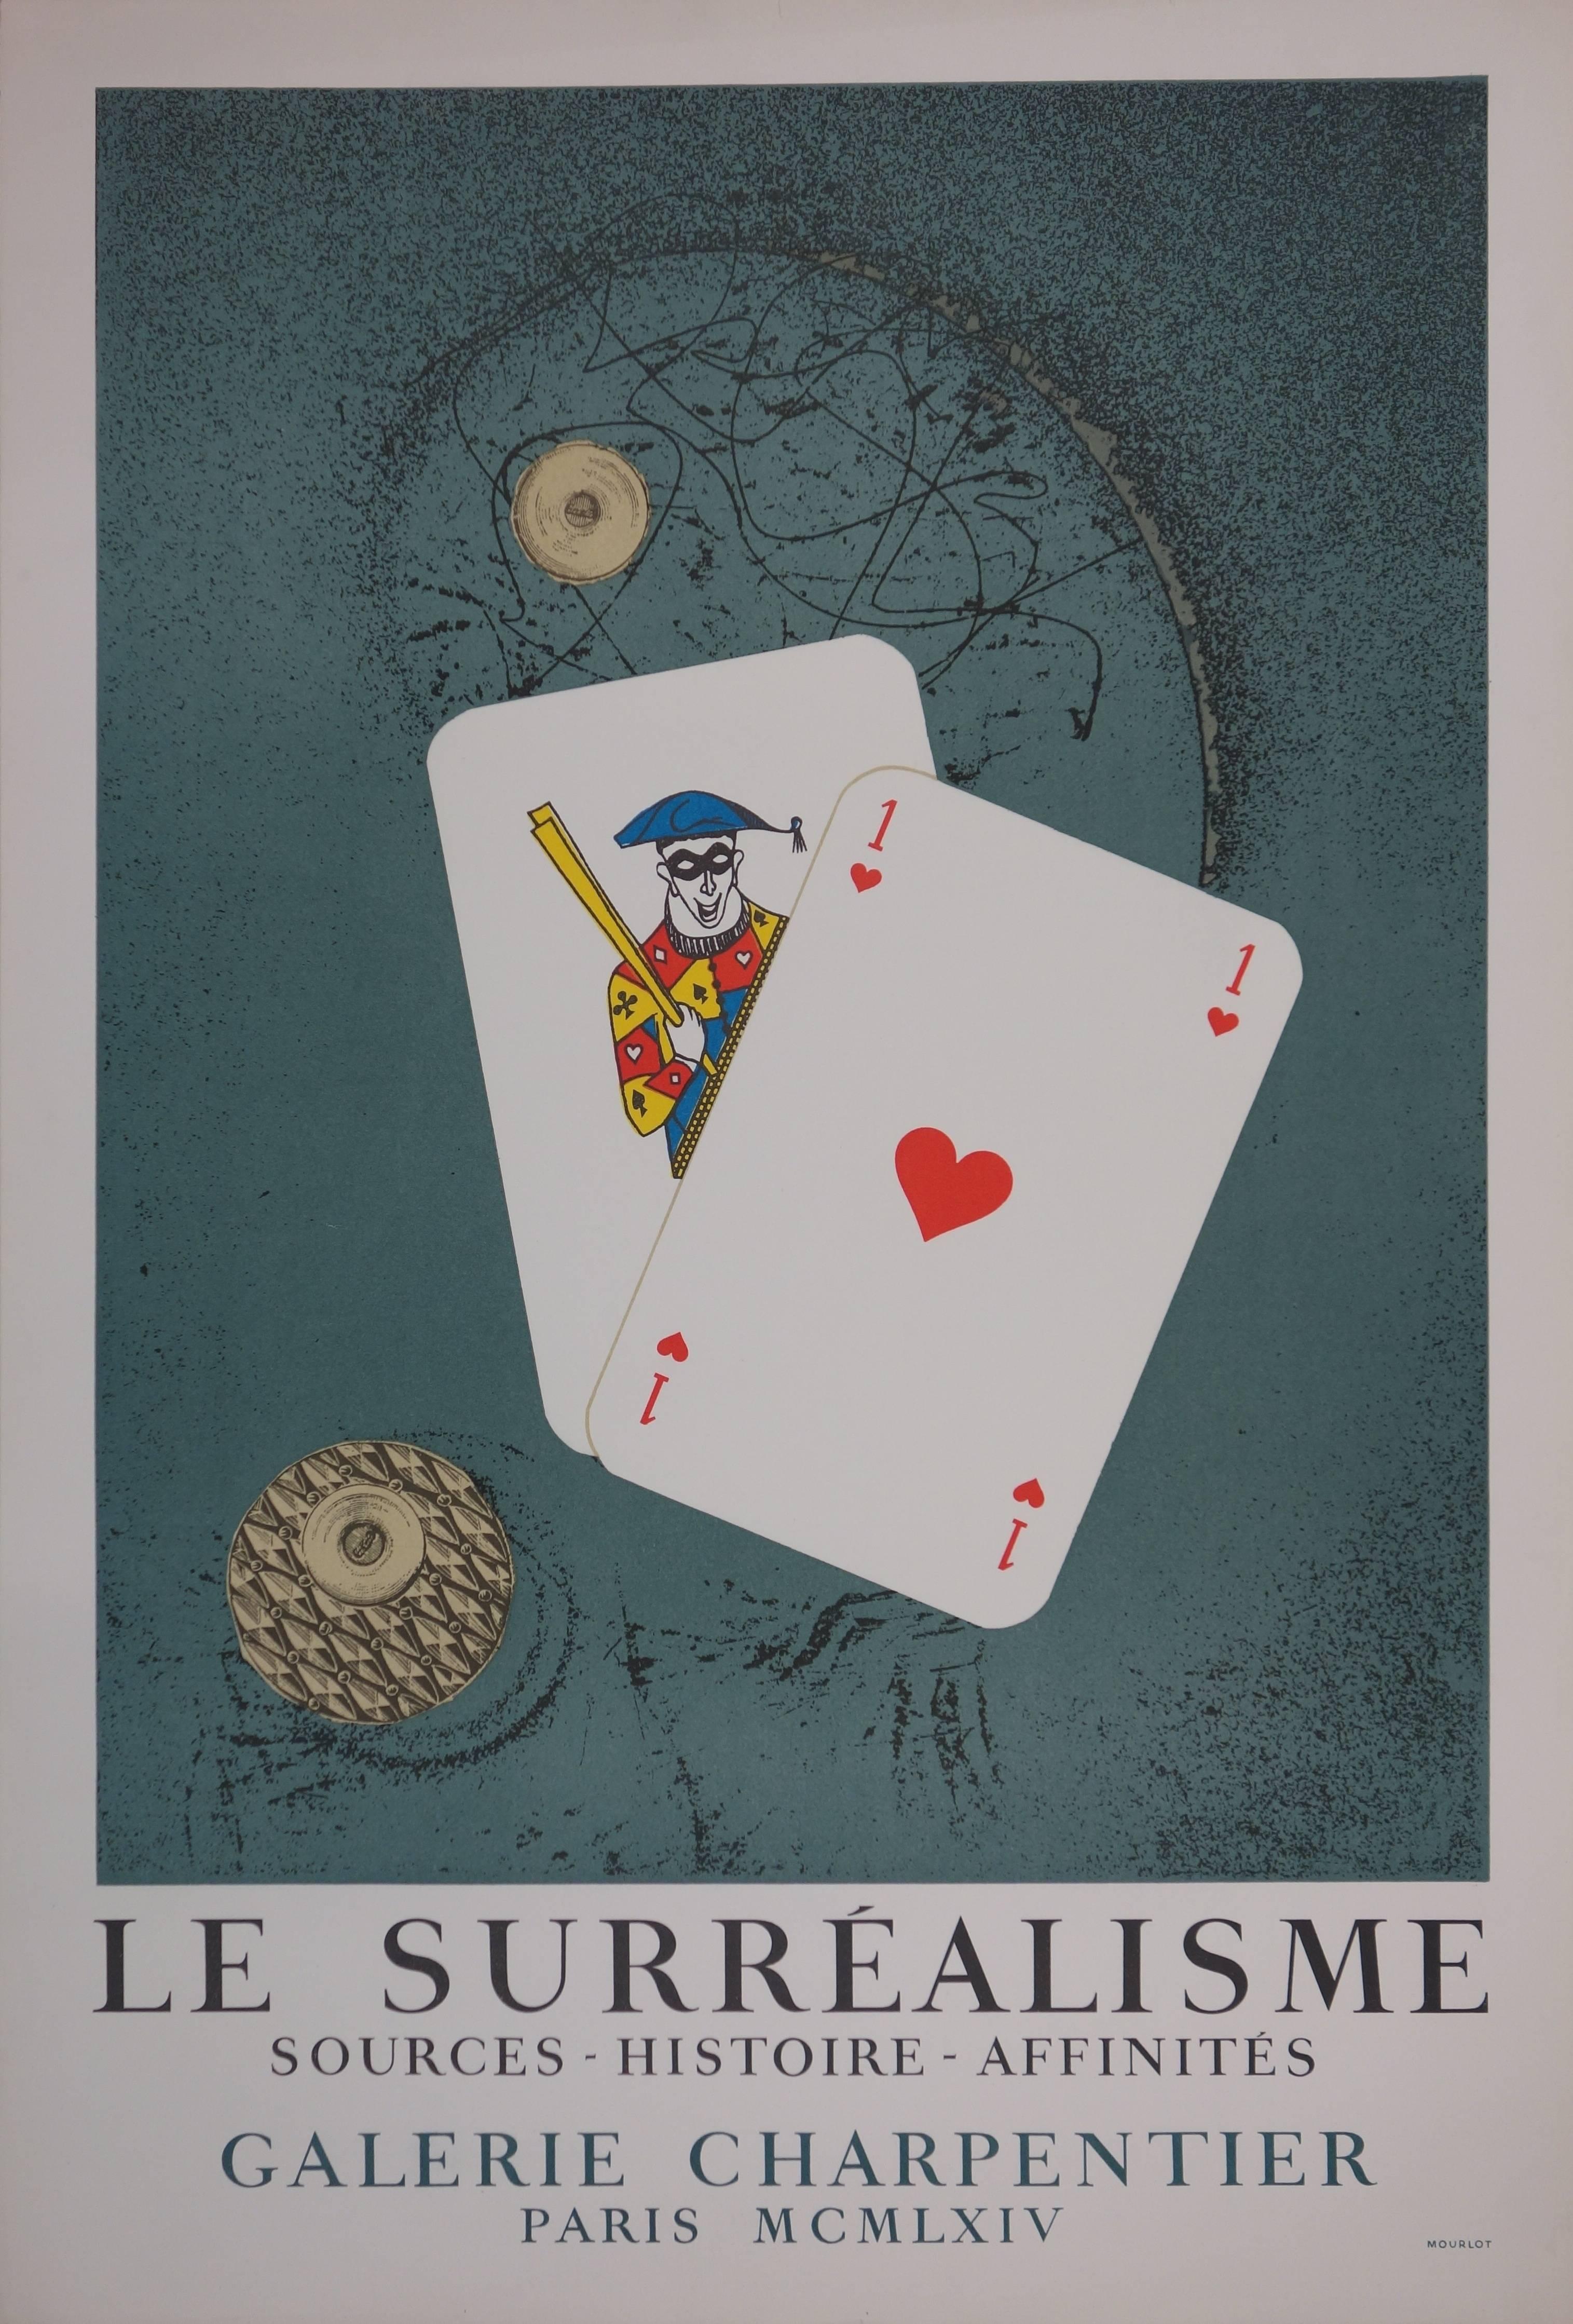 Exhibition poster after Max ERNST featuring an image of playing cards

HIgh-quality lithograph printed in Mourlot workshop in 1964
Created for the exhibition "Le Surréalisme, Sources, histoires, affinités" at Gallery Charpentier 
74 x 50 cm (c. 30 x